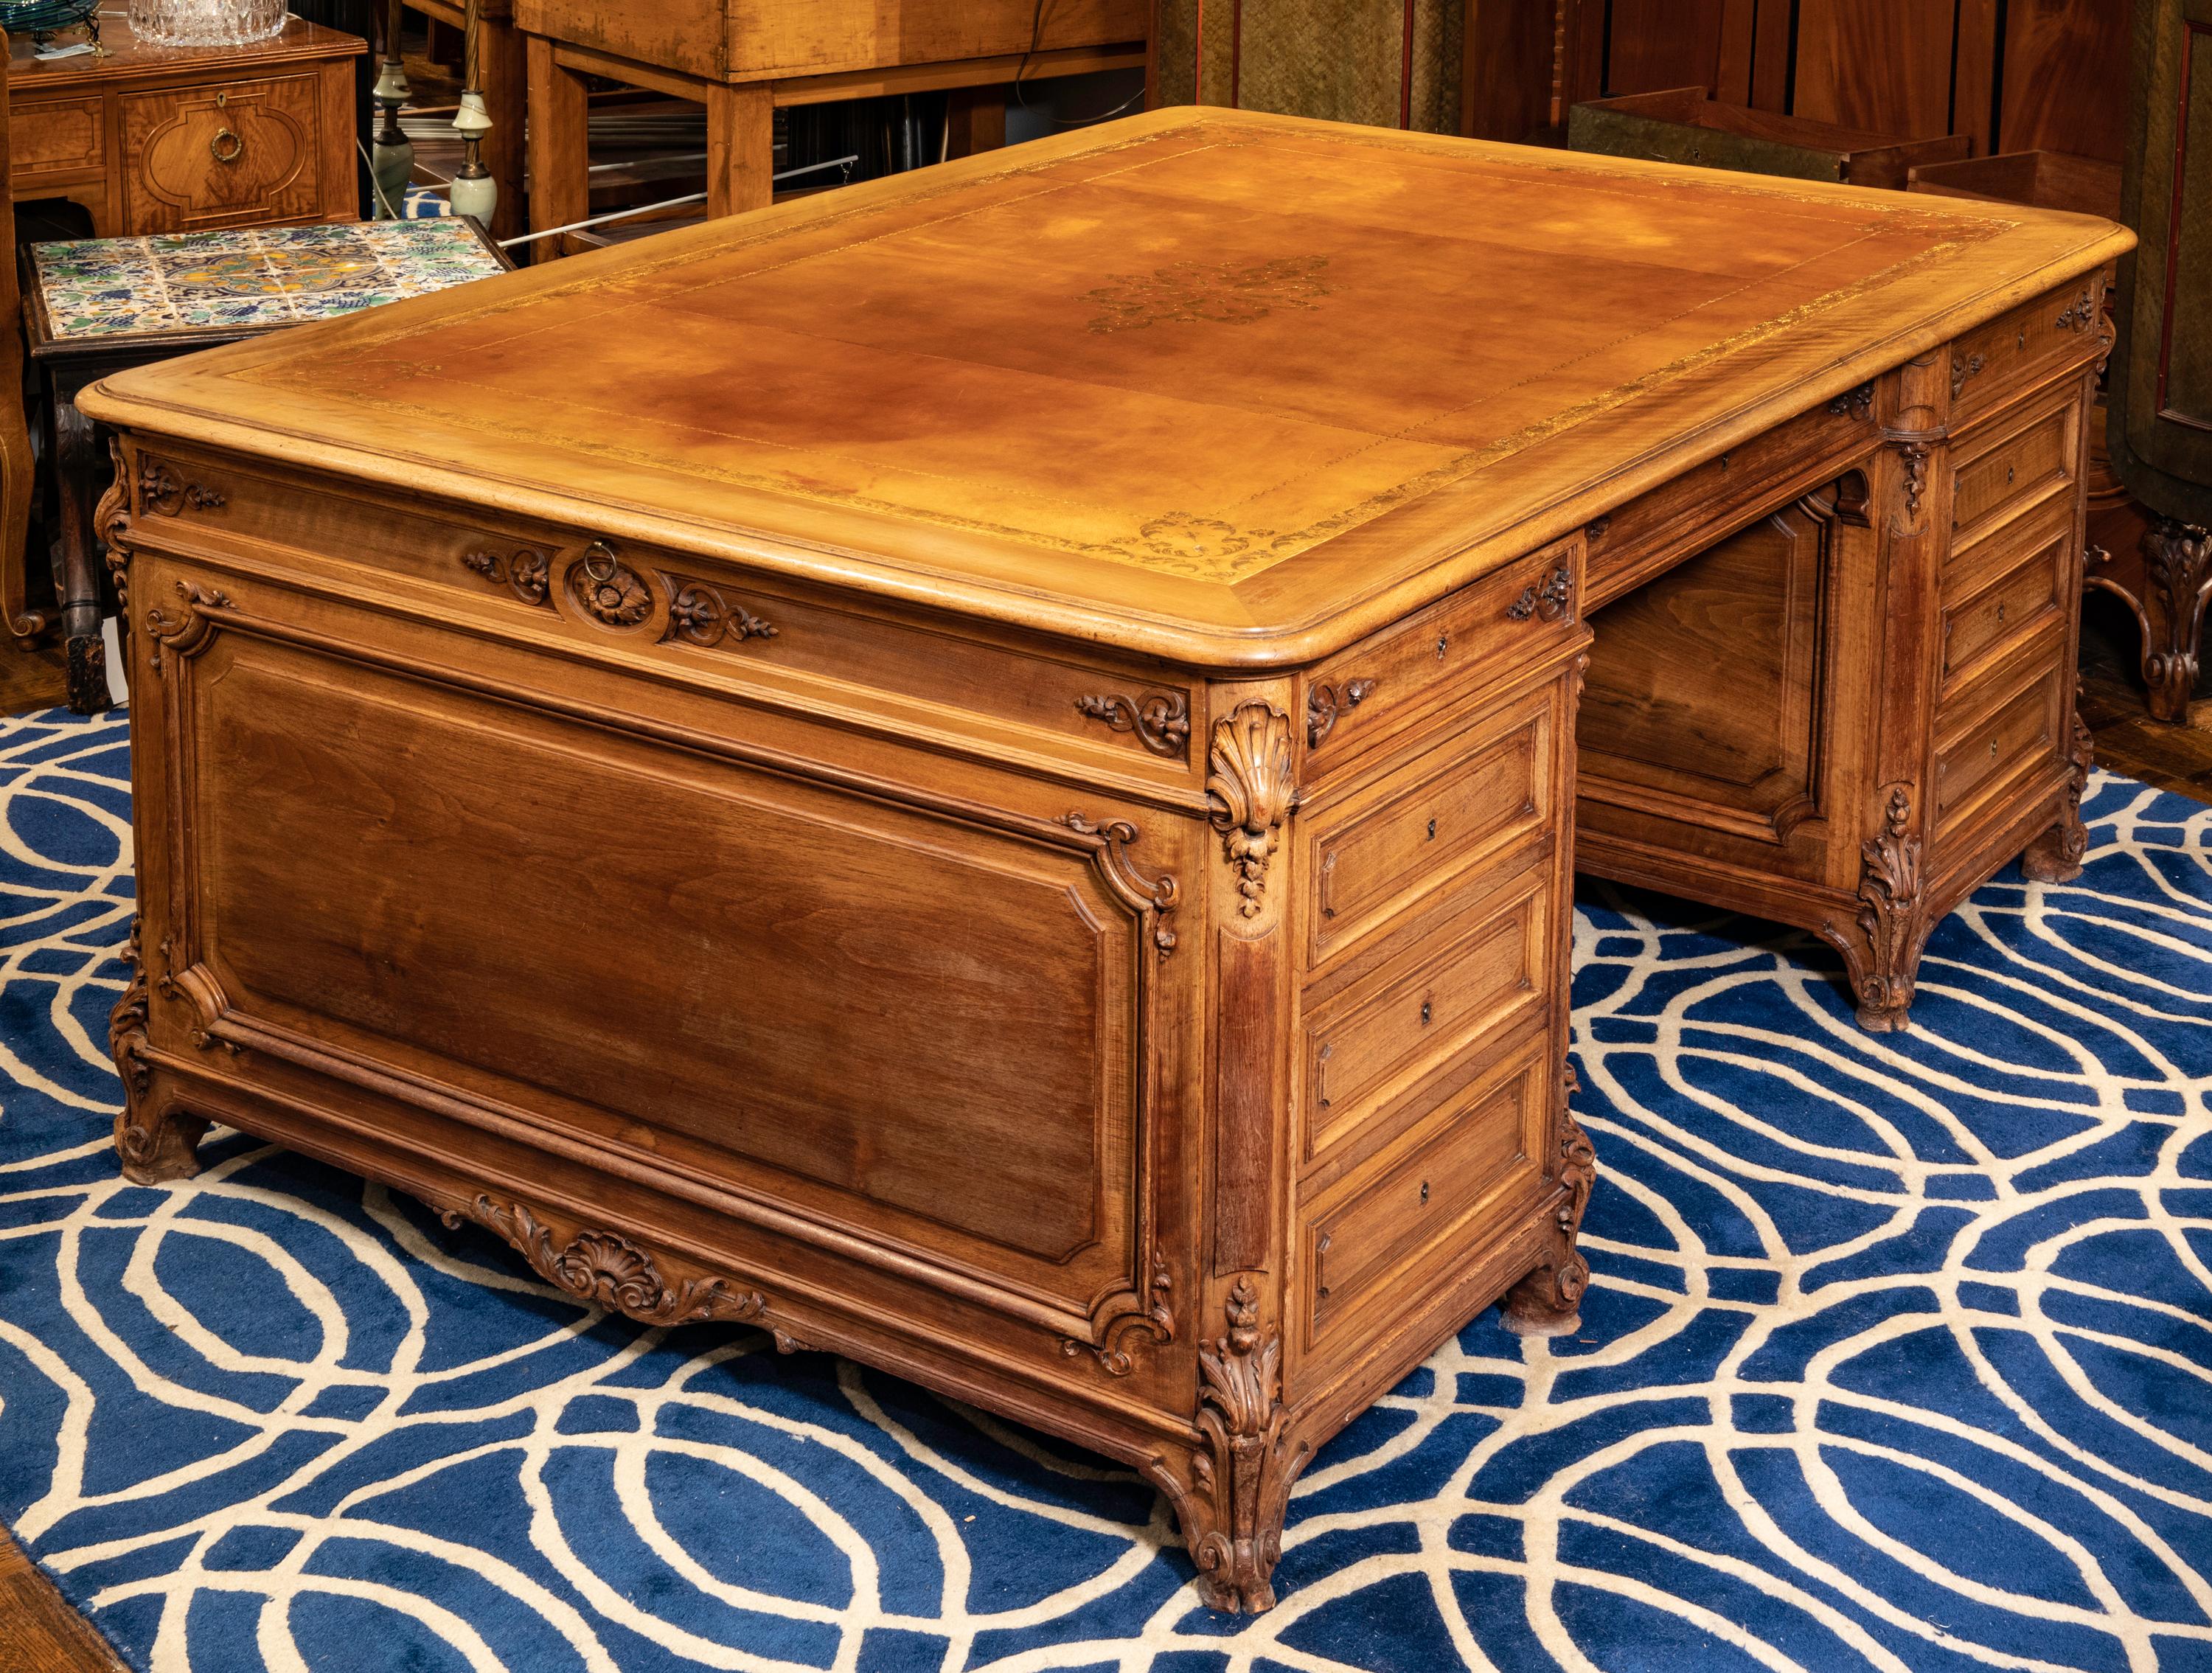 Beautiful 1900s French Louis XV style partner's desk. Very finely carved French oakwood. Leather top in Gilt tooling and glass top for protection. Pencil drawers between banks of four drawers on each sides that extend to the other sides, individual